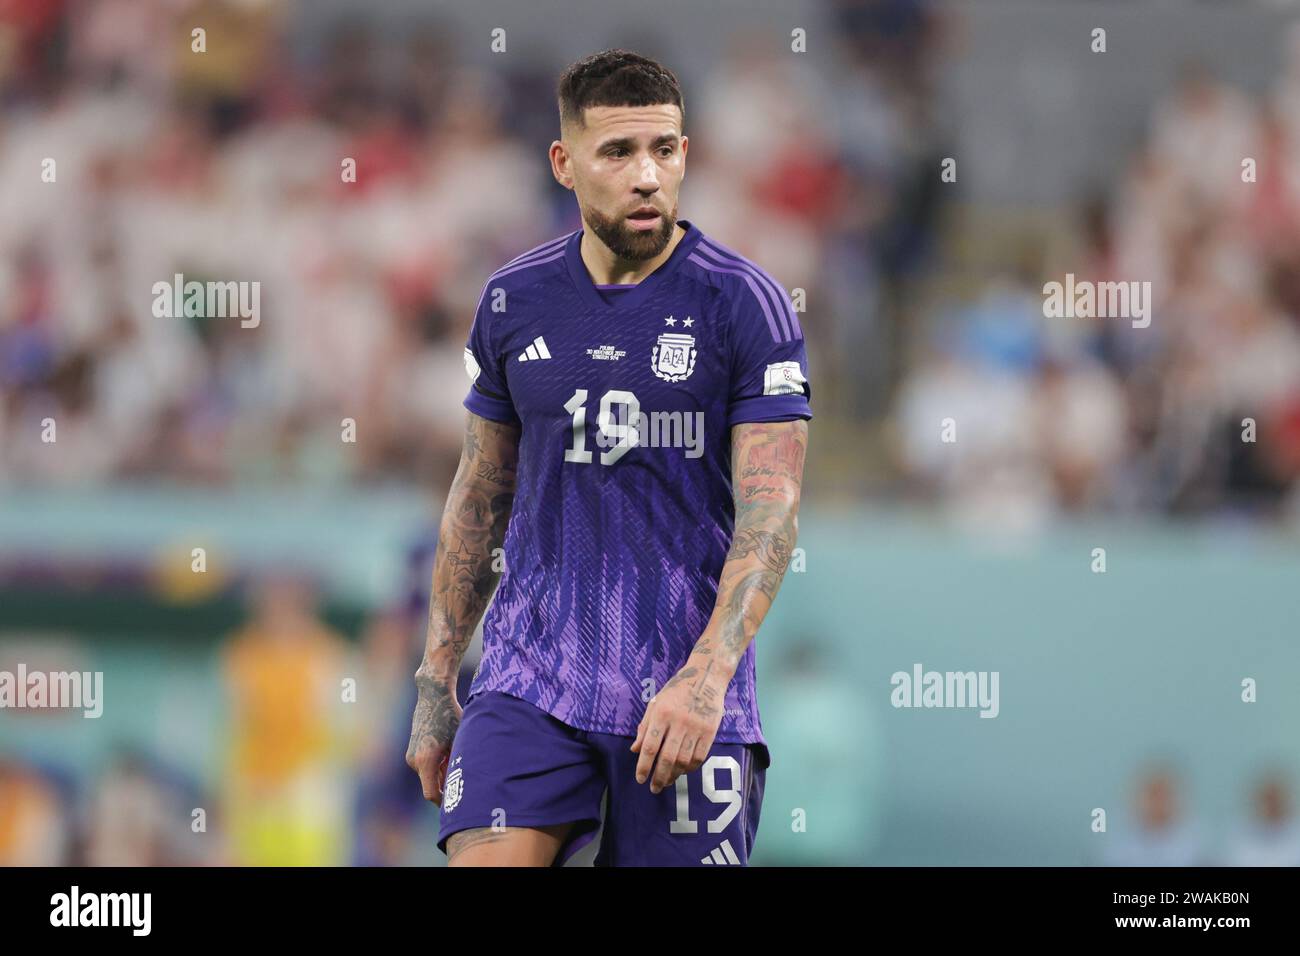 Nicolas Otamendi of Argentina seen in action during the FIFA World Cup Qatar 2022 match between Poland and Argentina at Stadium 974. Final score; Poland 0:2 Argentina. Stock Photo